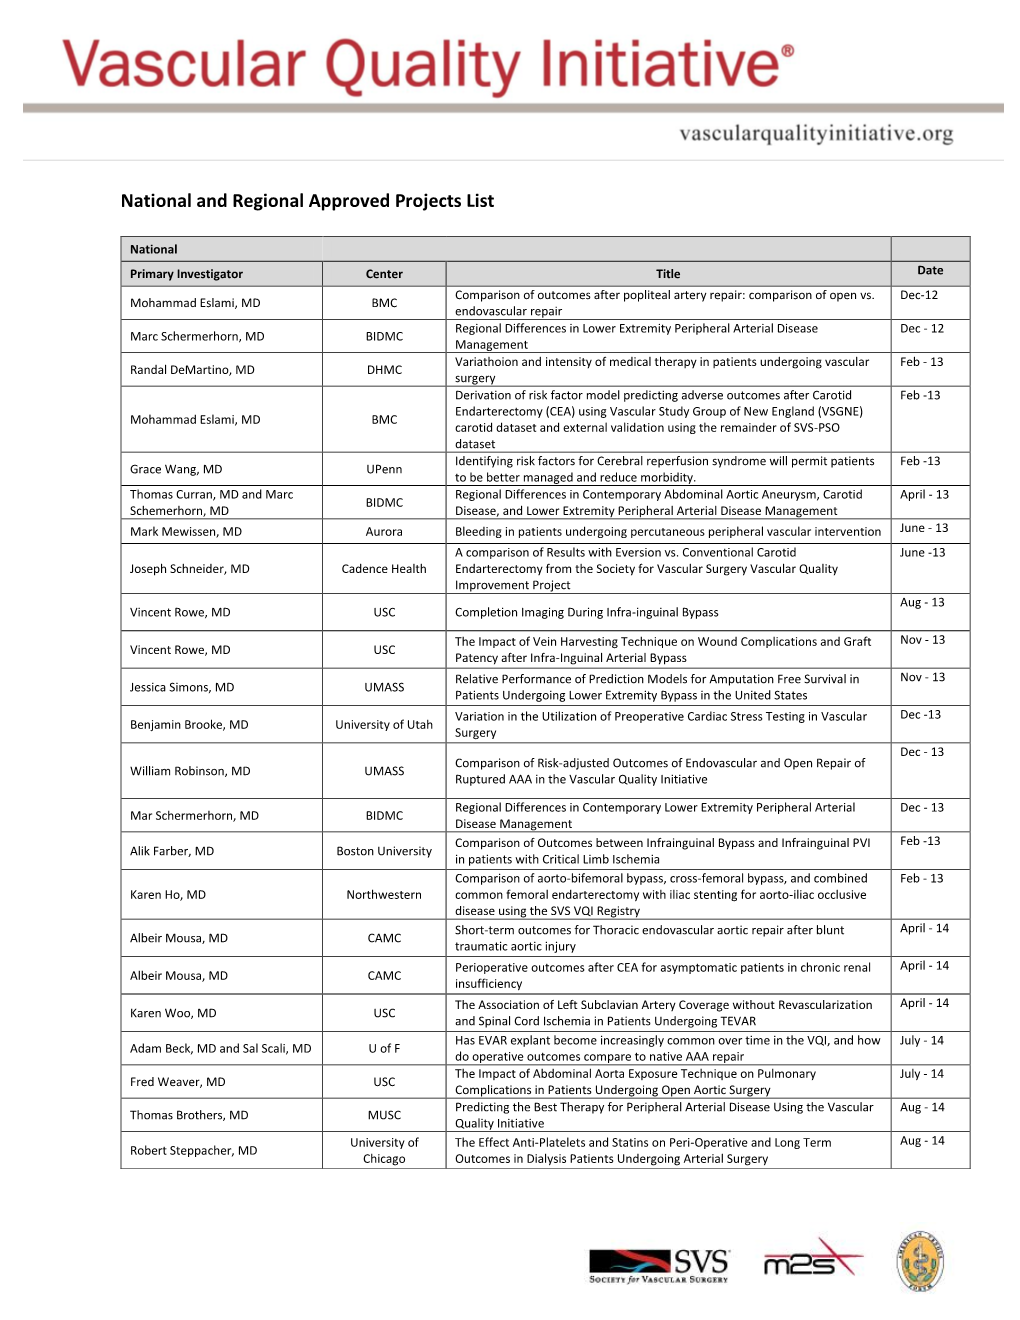 National and Regional Approved Projects List